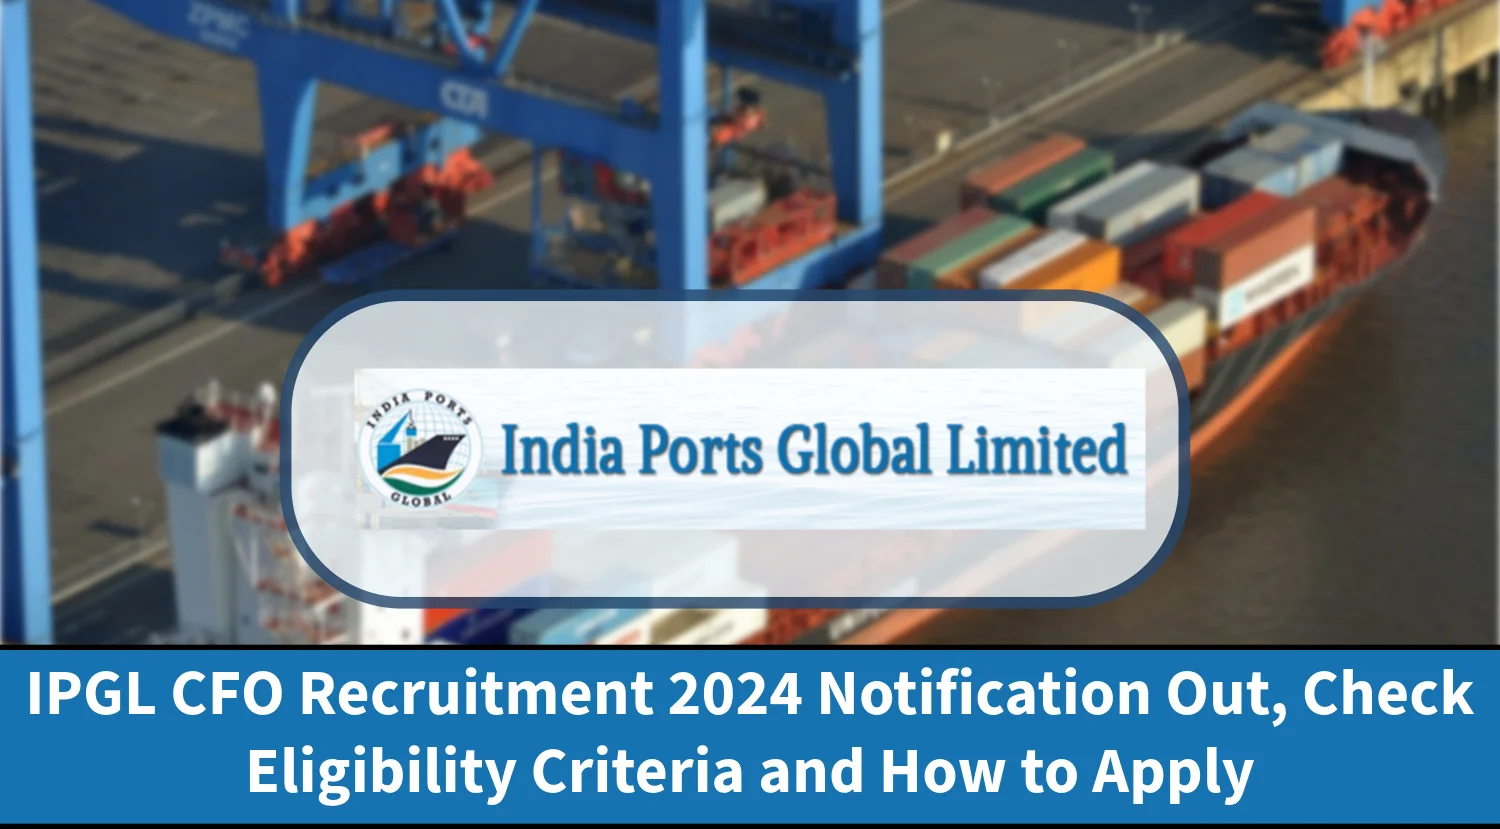 IPGL CFO Recruitment 2024 Notification Out, Check Eligibility Criteria and How to Apply